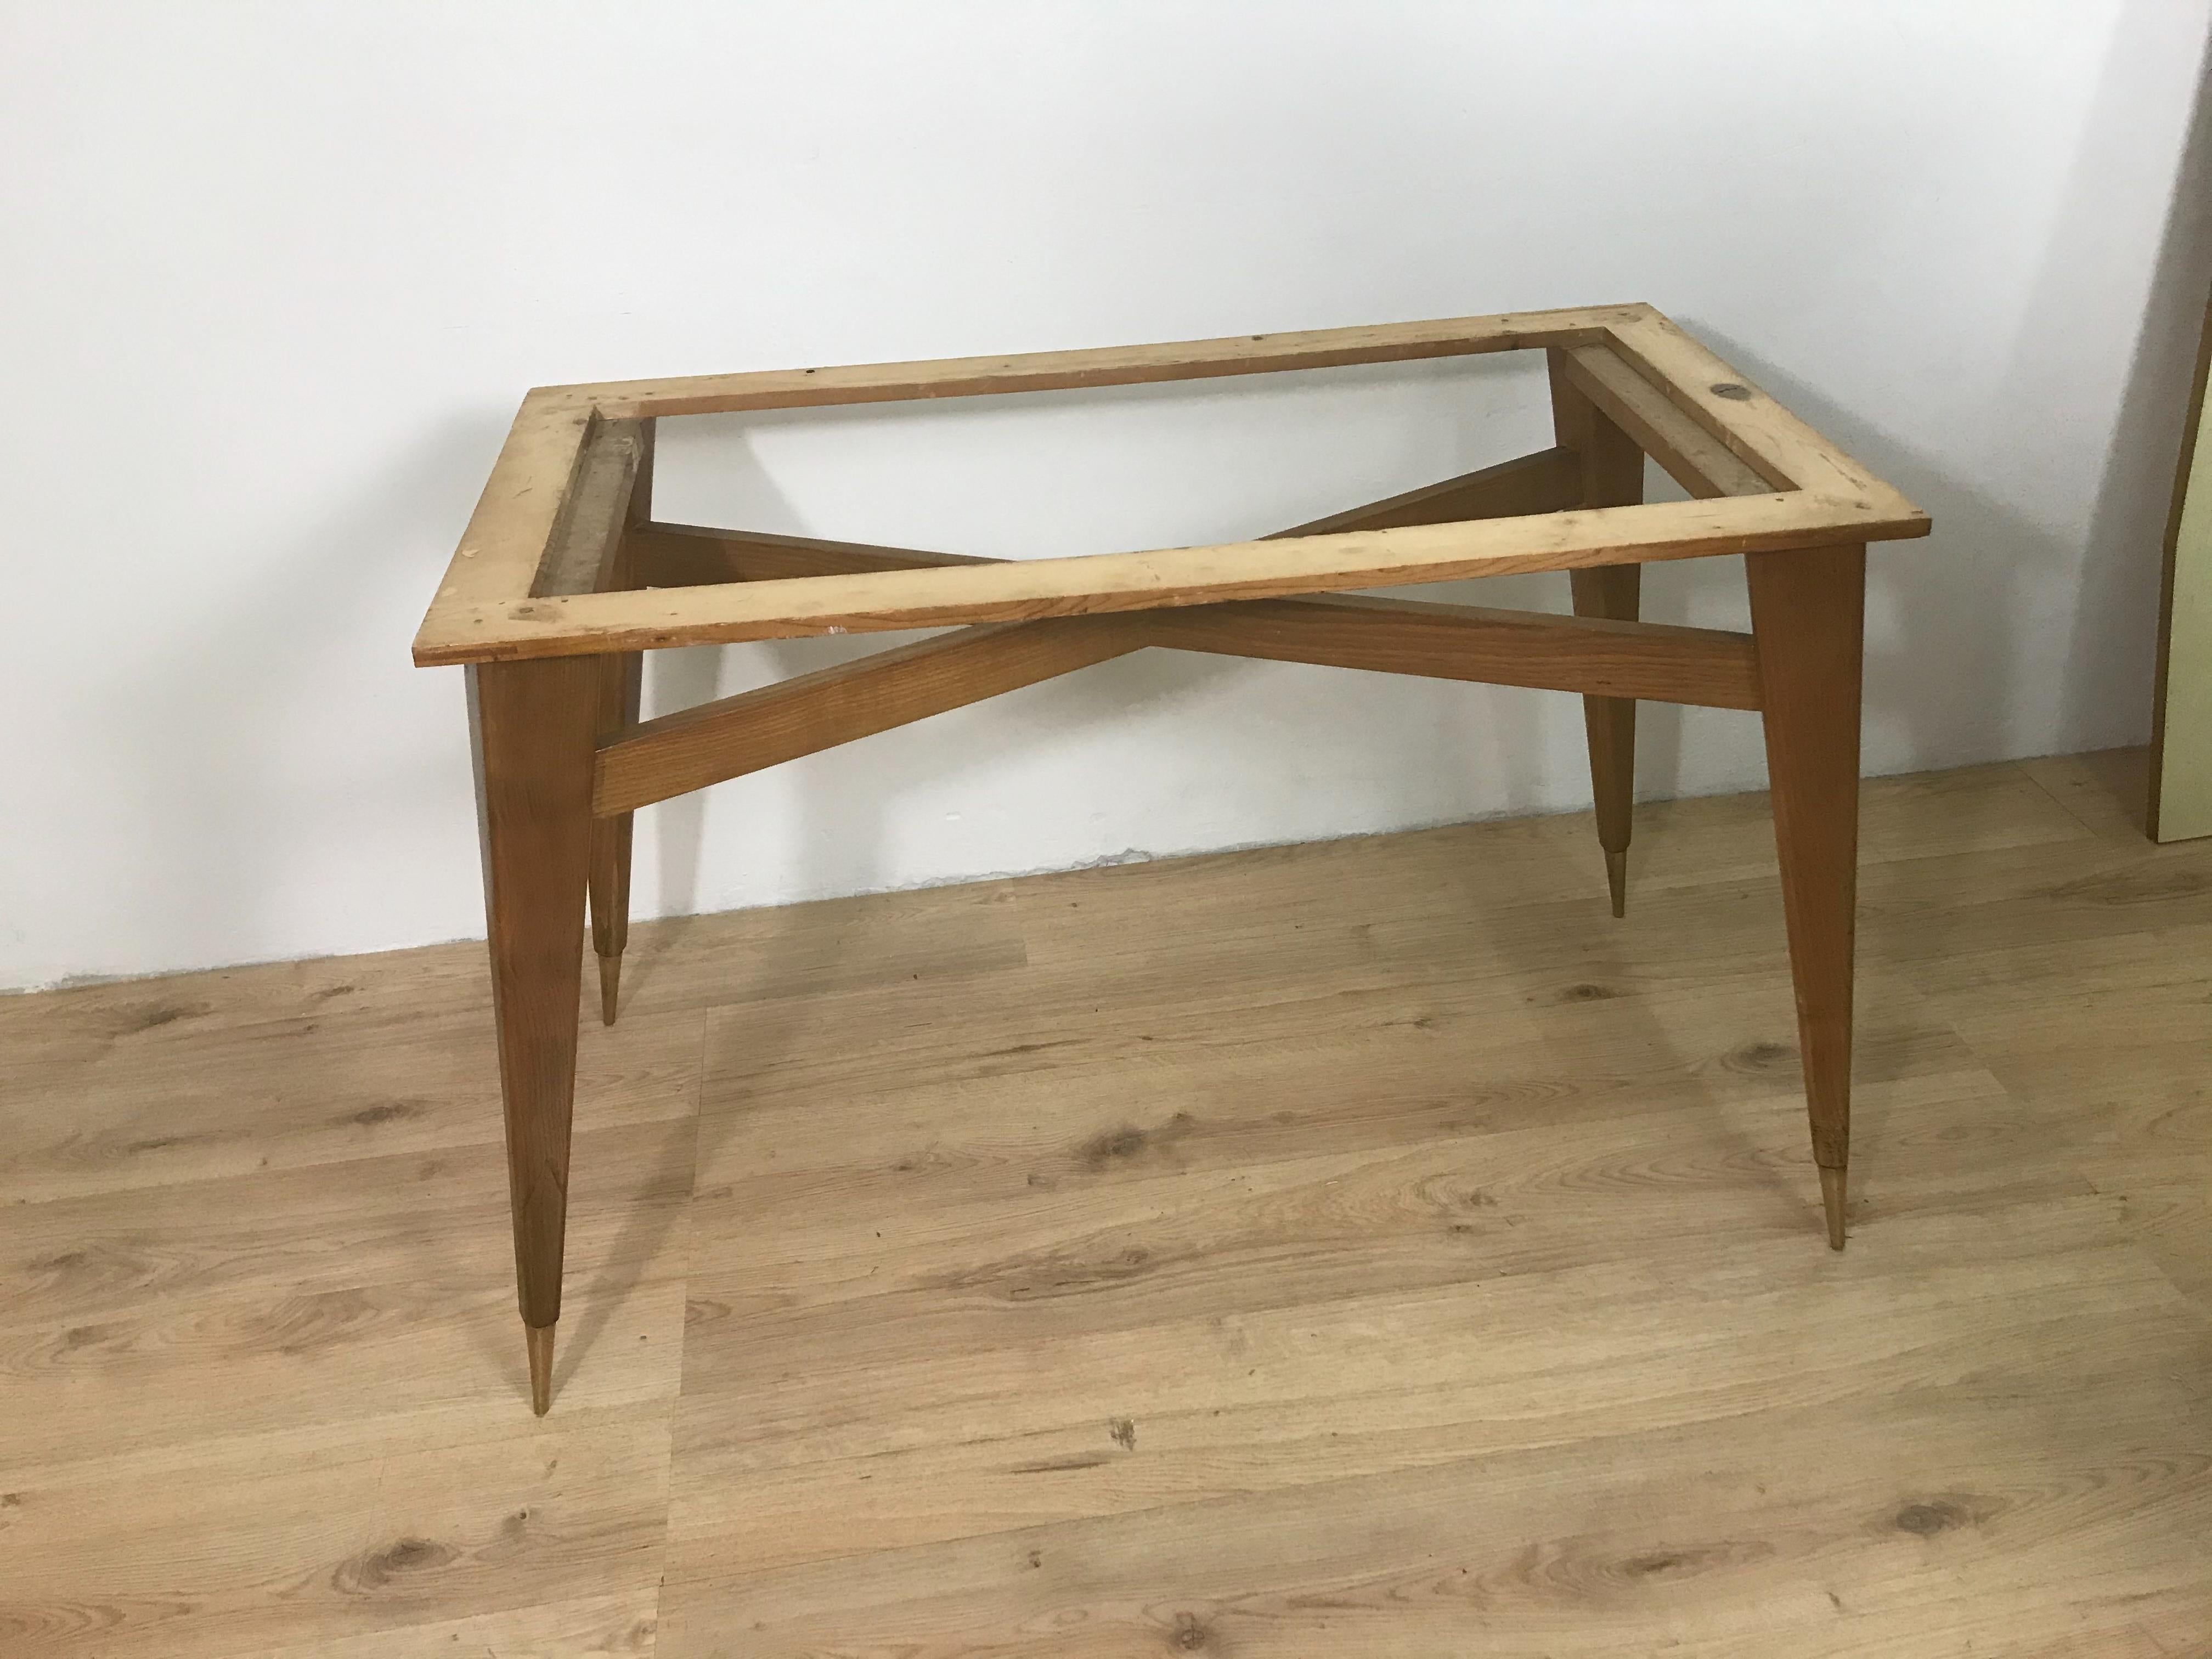 Ash wood table and laminate top, with brass tips, the table is in perfect condition and has undergone a restoration in the feet.